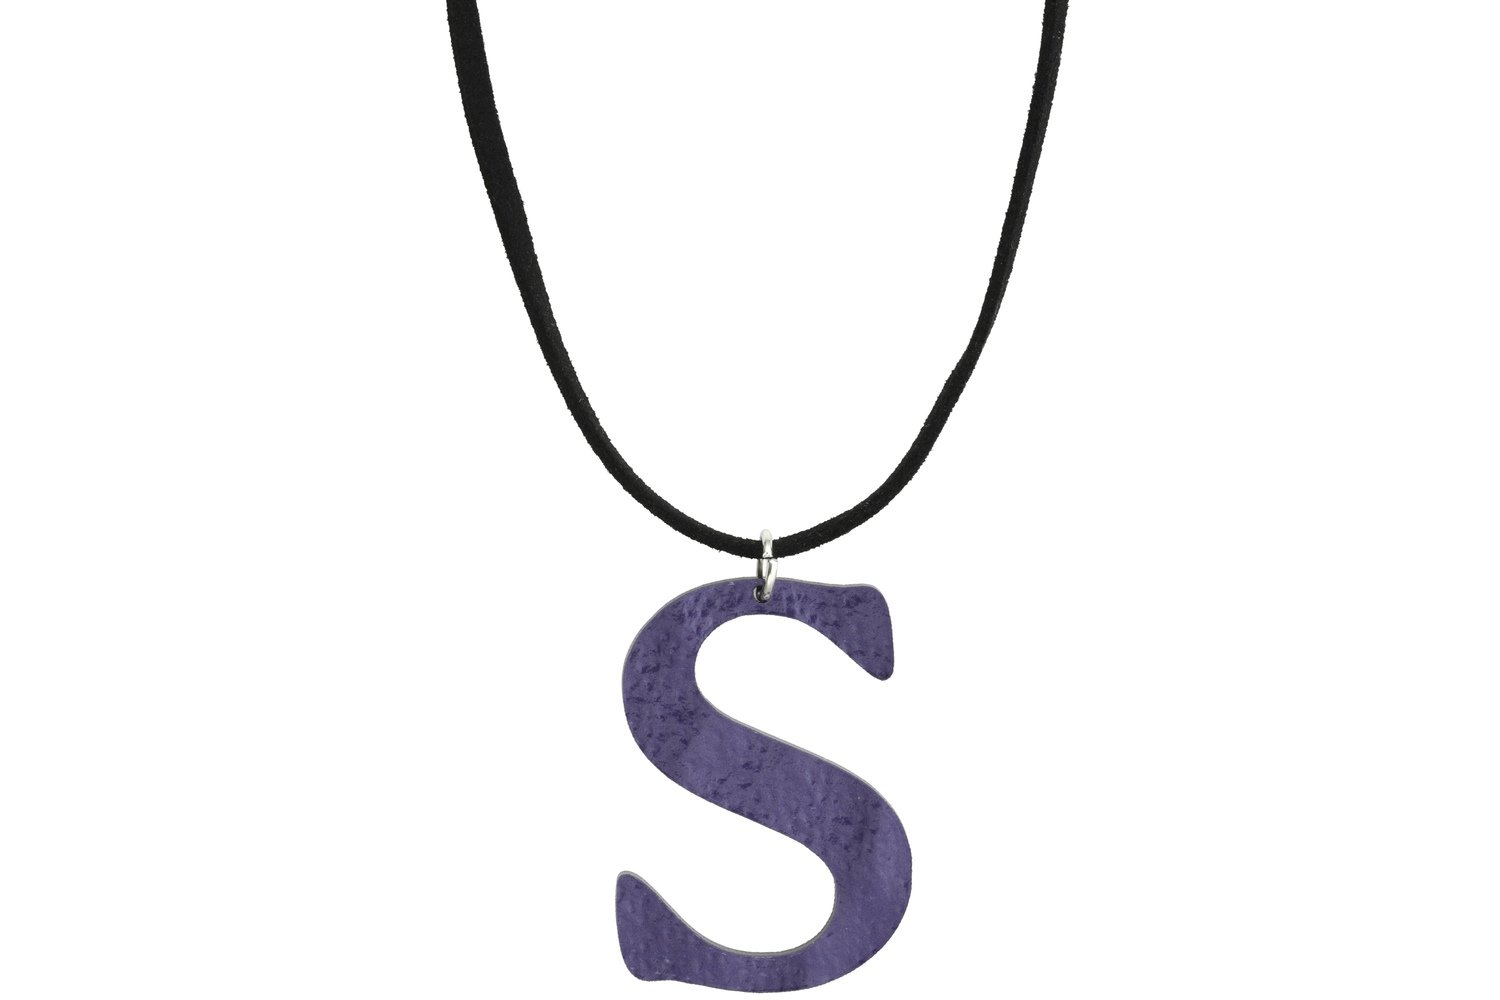 Sculpted Alphabet Pendant with Suede Leather Cord Necklace